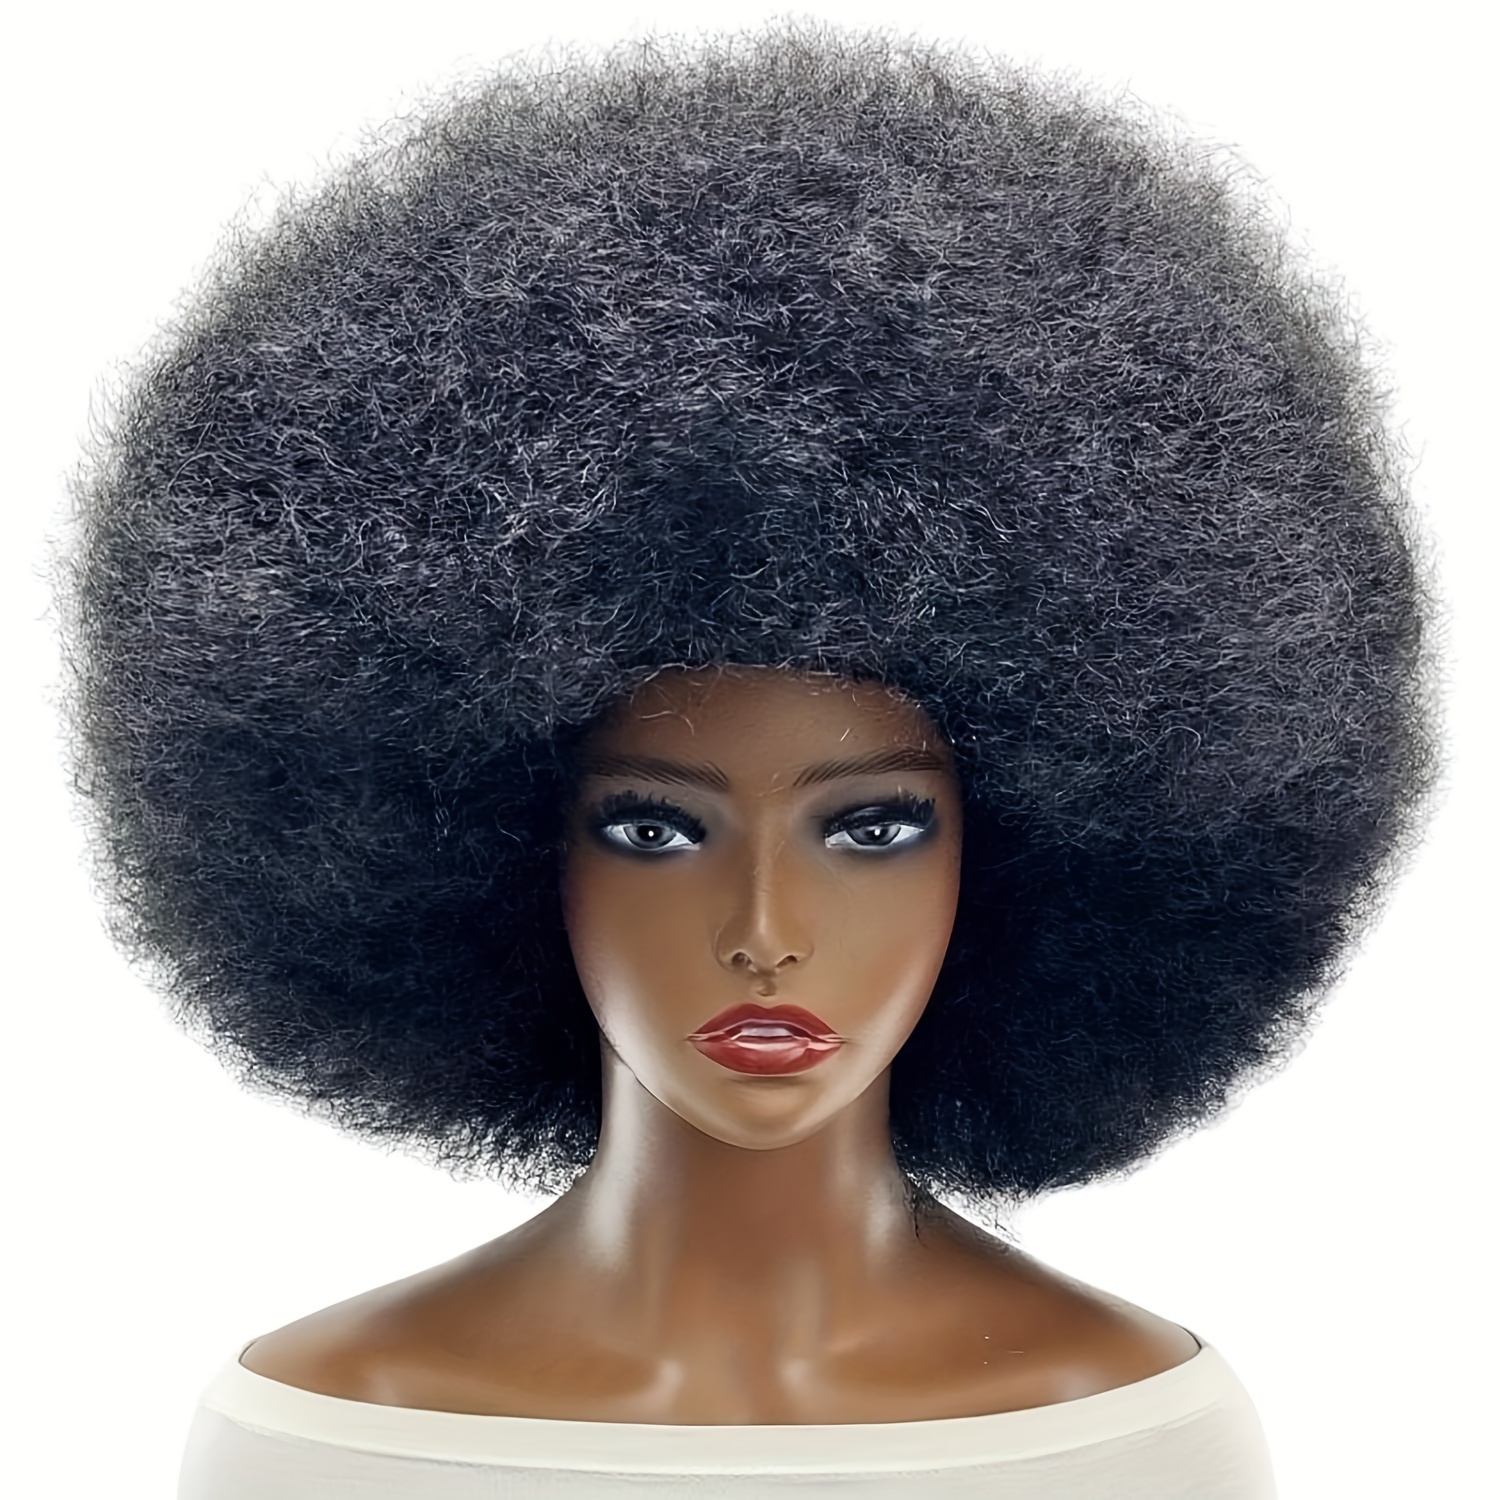 

Fun - Ultra-fluffy Short Curly Afro Wig For Women - Premium Synthetic Fibers, Large Bouncy Puff - Perfect For Cosplay, Parties, And Everyday Glam